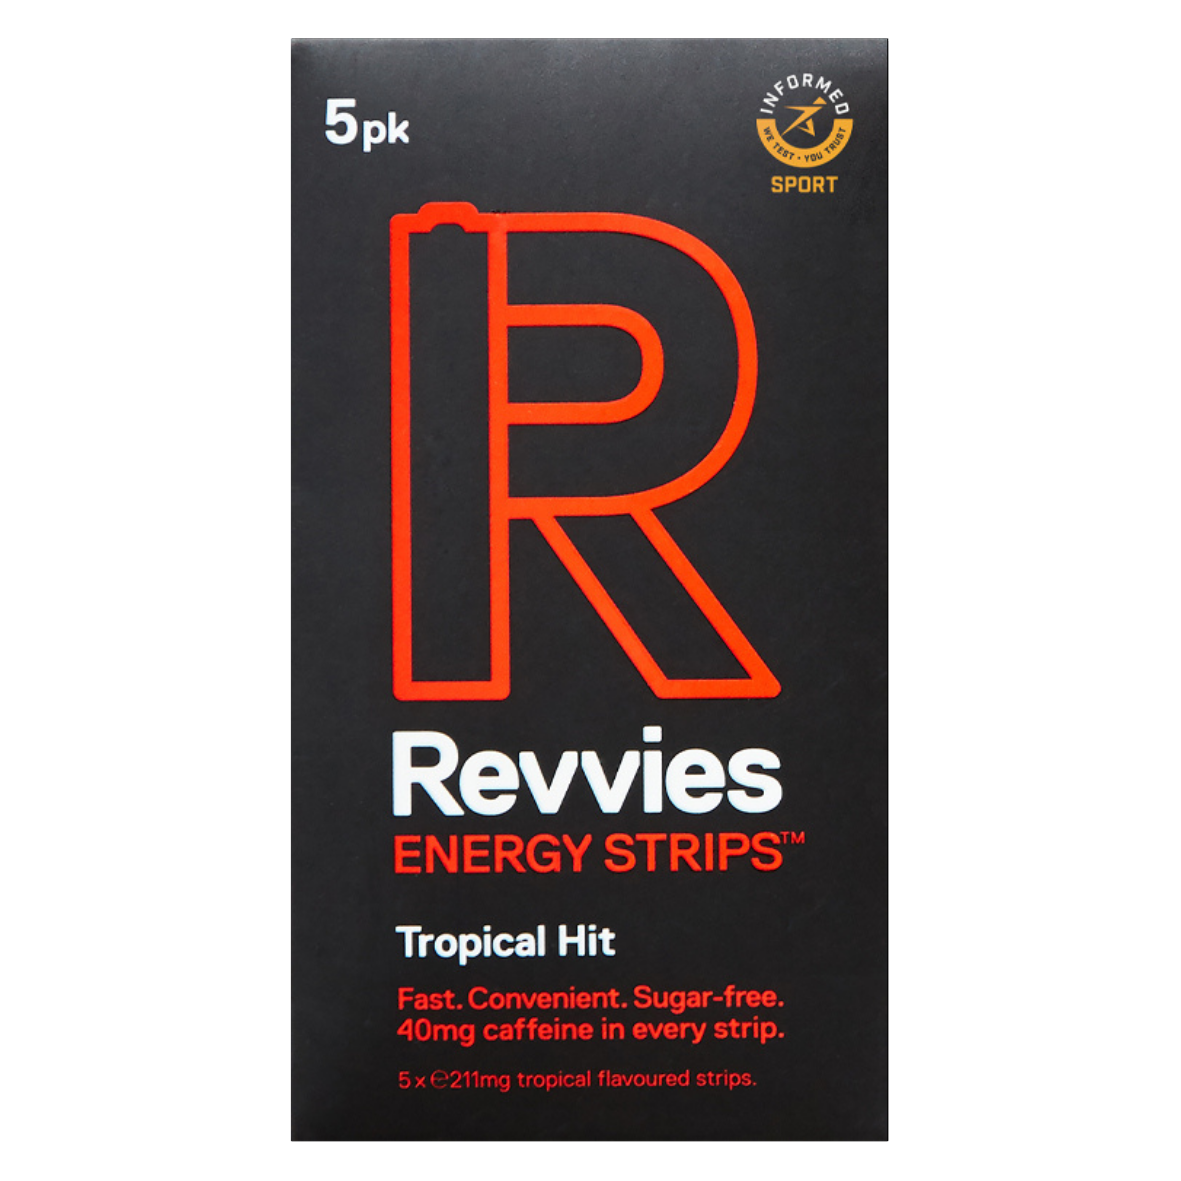 Revvies Tropical Hit Energy Strips with 40mg caffeine